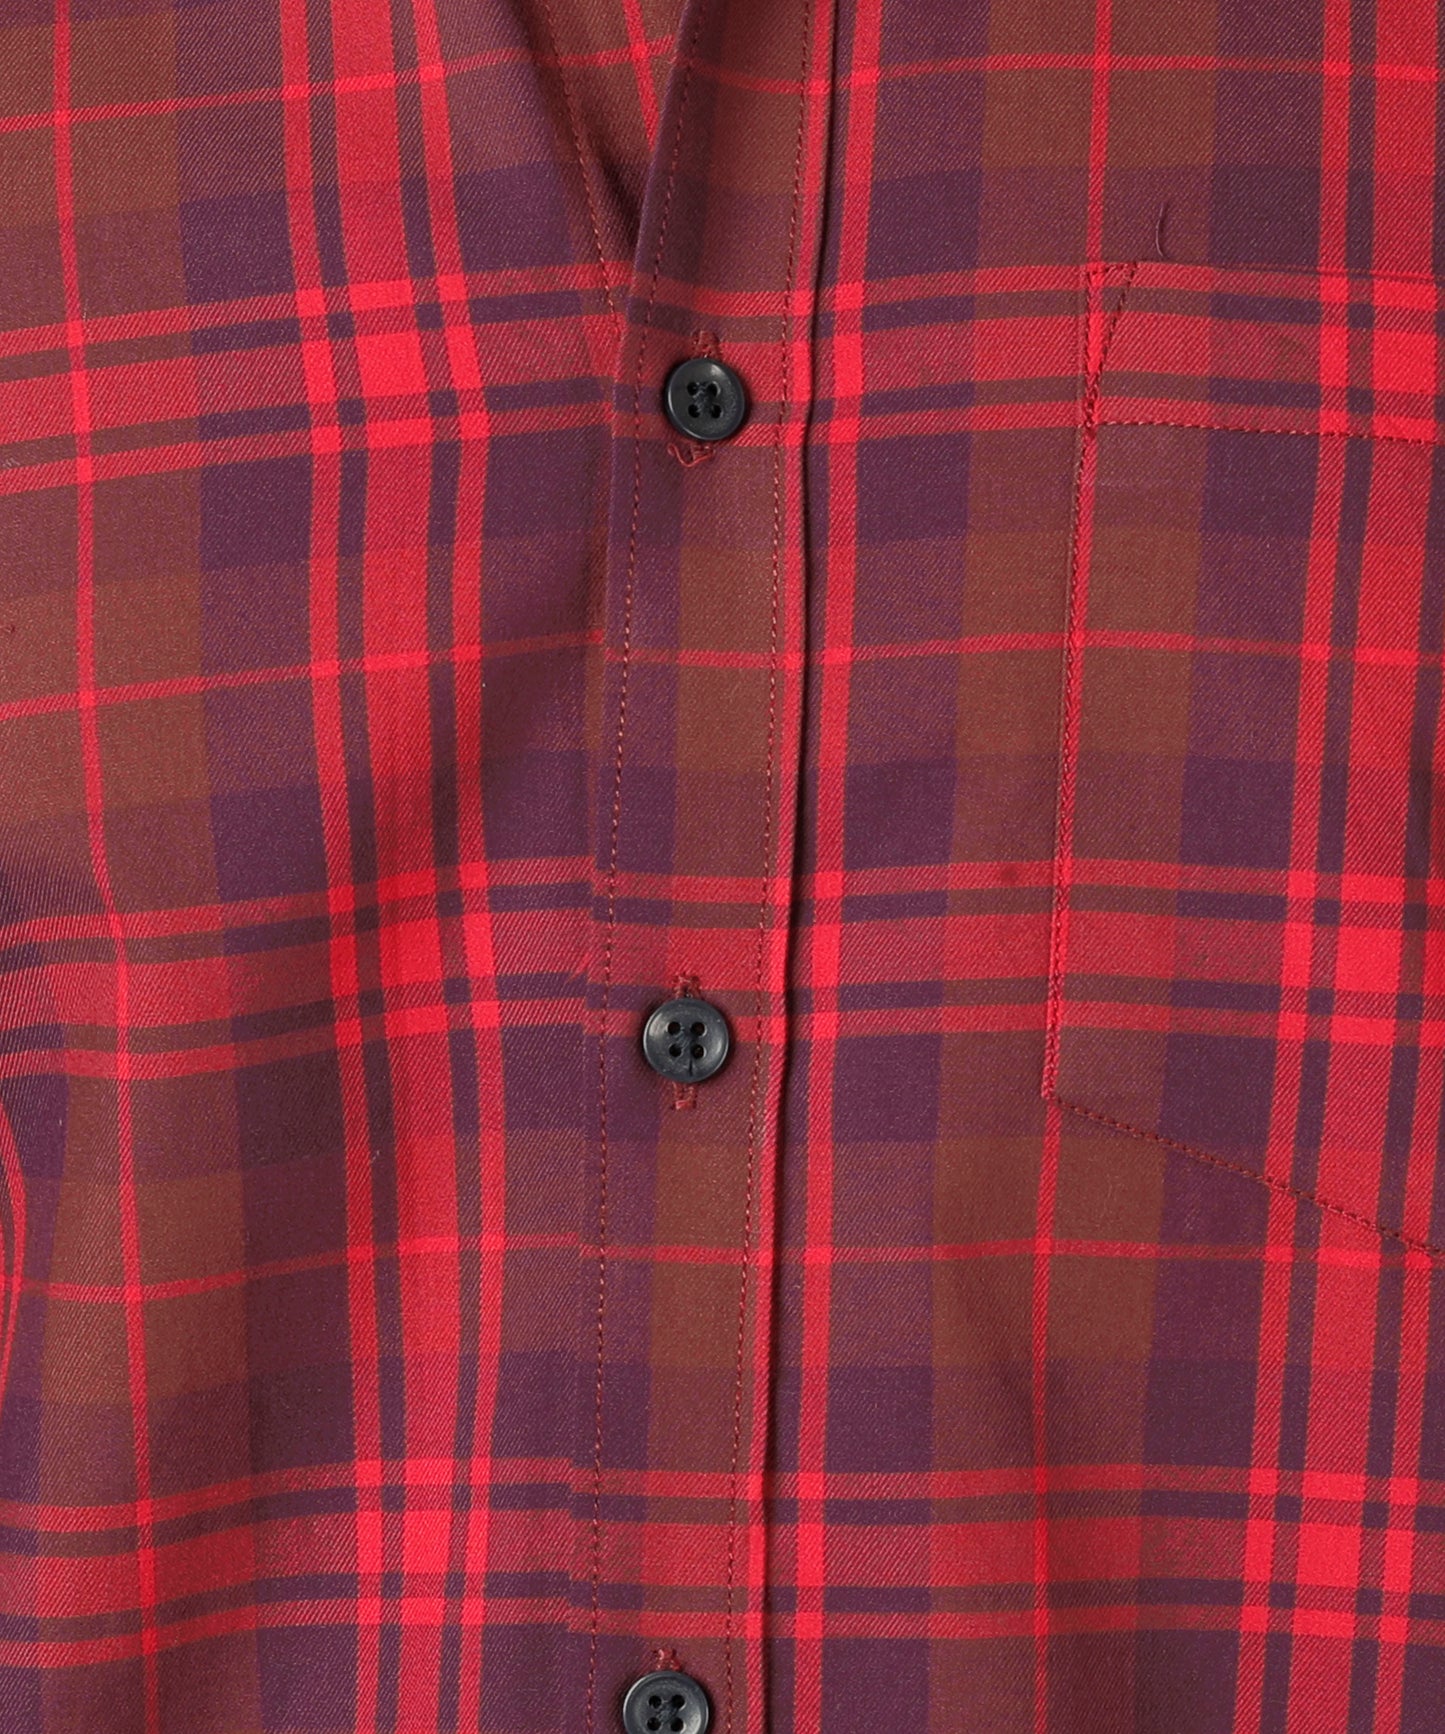 5thanfold Men's Formal Pure Cotton Full Sleeve Checkered Red Slim Fit Shirt